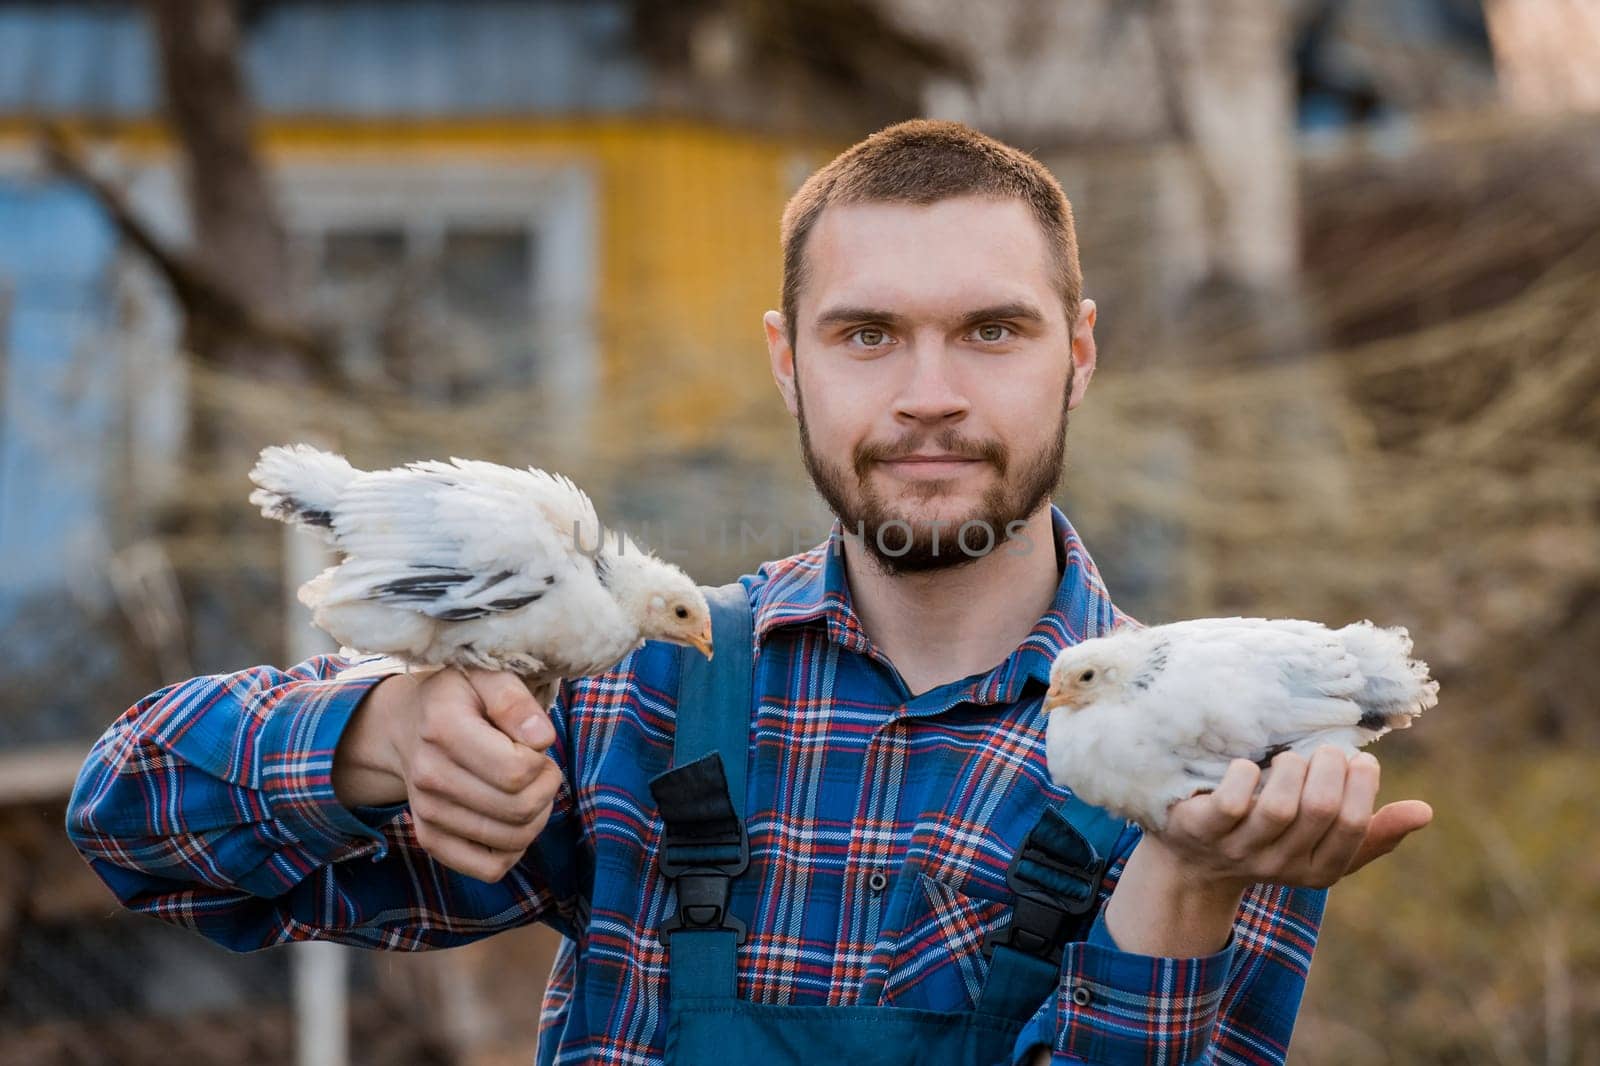 A satisfied farmer portrait of Caucasian a man with a beard, in overalls and a shirt, holds two white dwarf chickens in his arms against the backdrop of a countryside by AYDO8